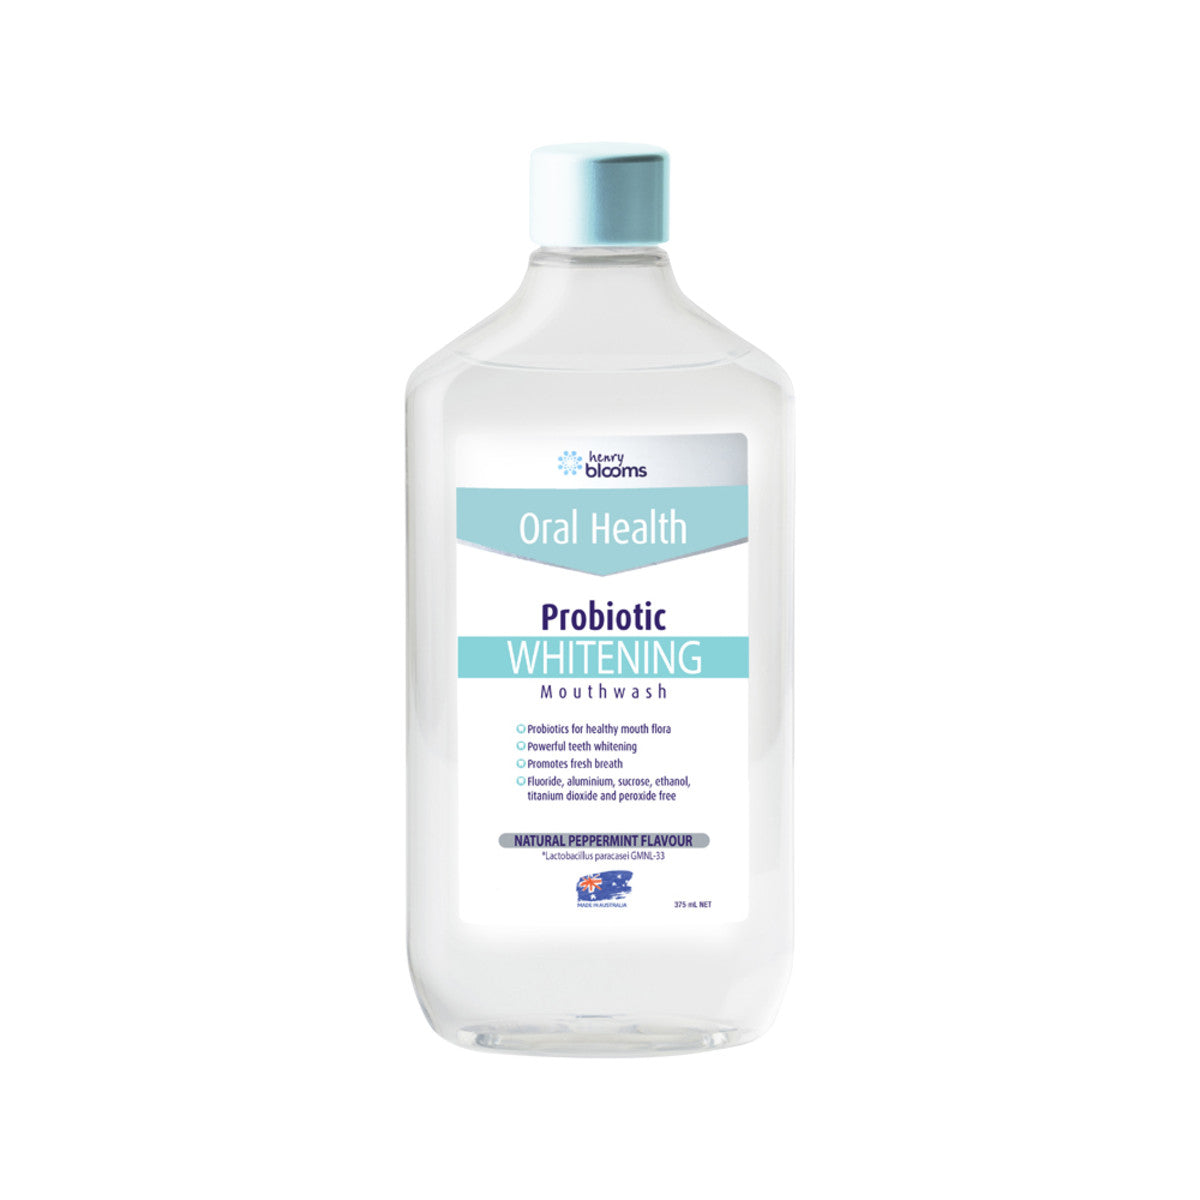 Henry Blooms - Probiotic Mouthwash Whitening Peppermint